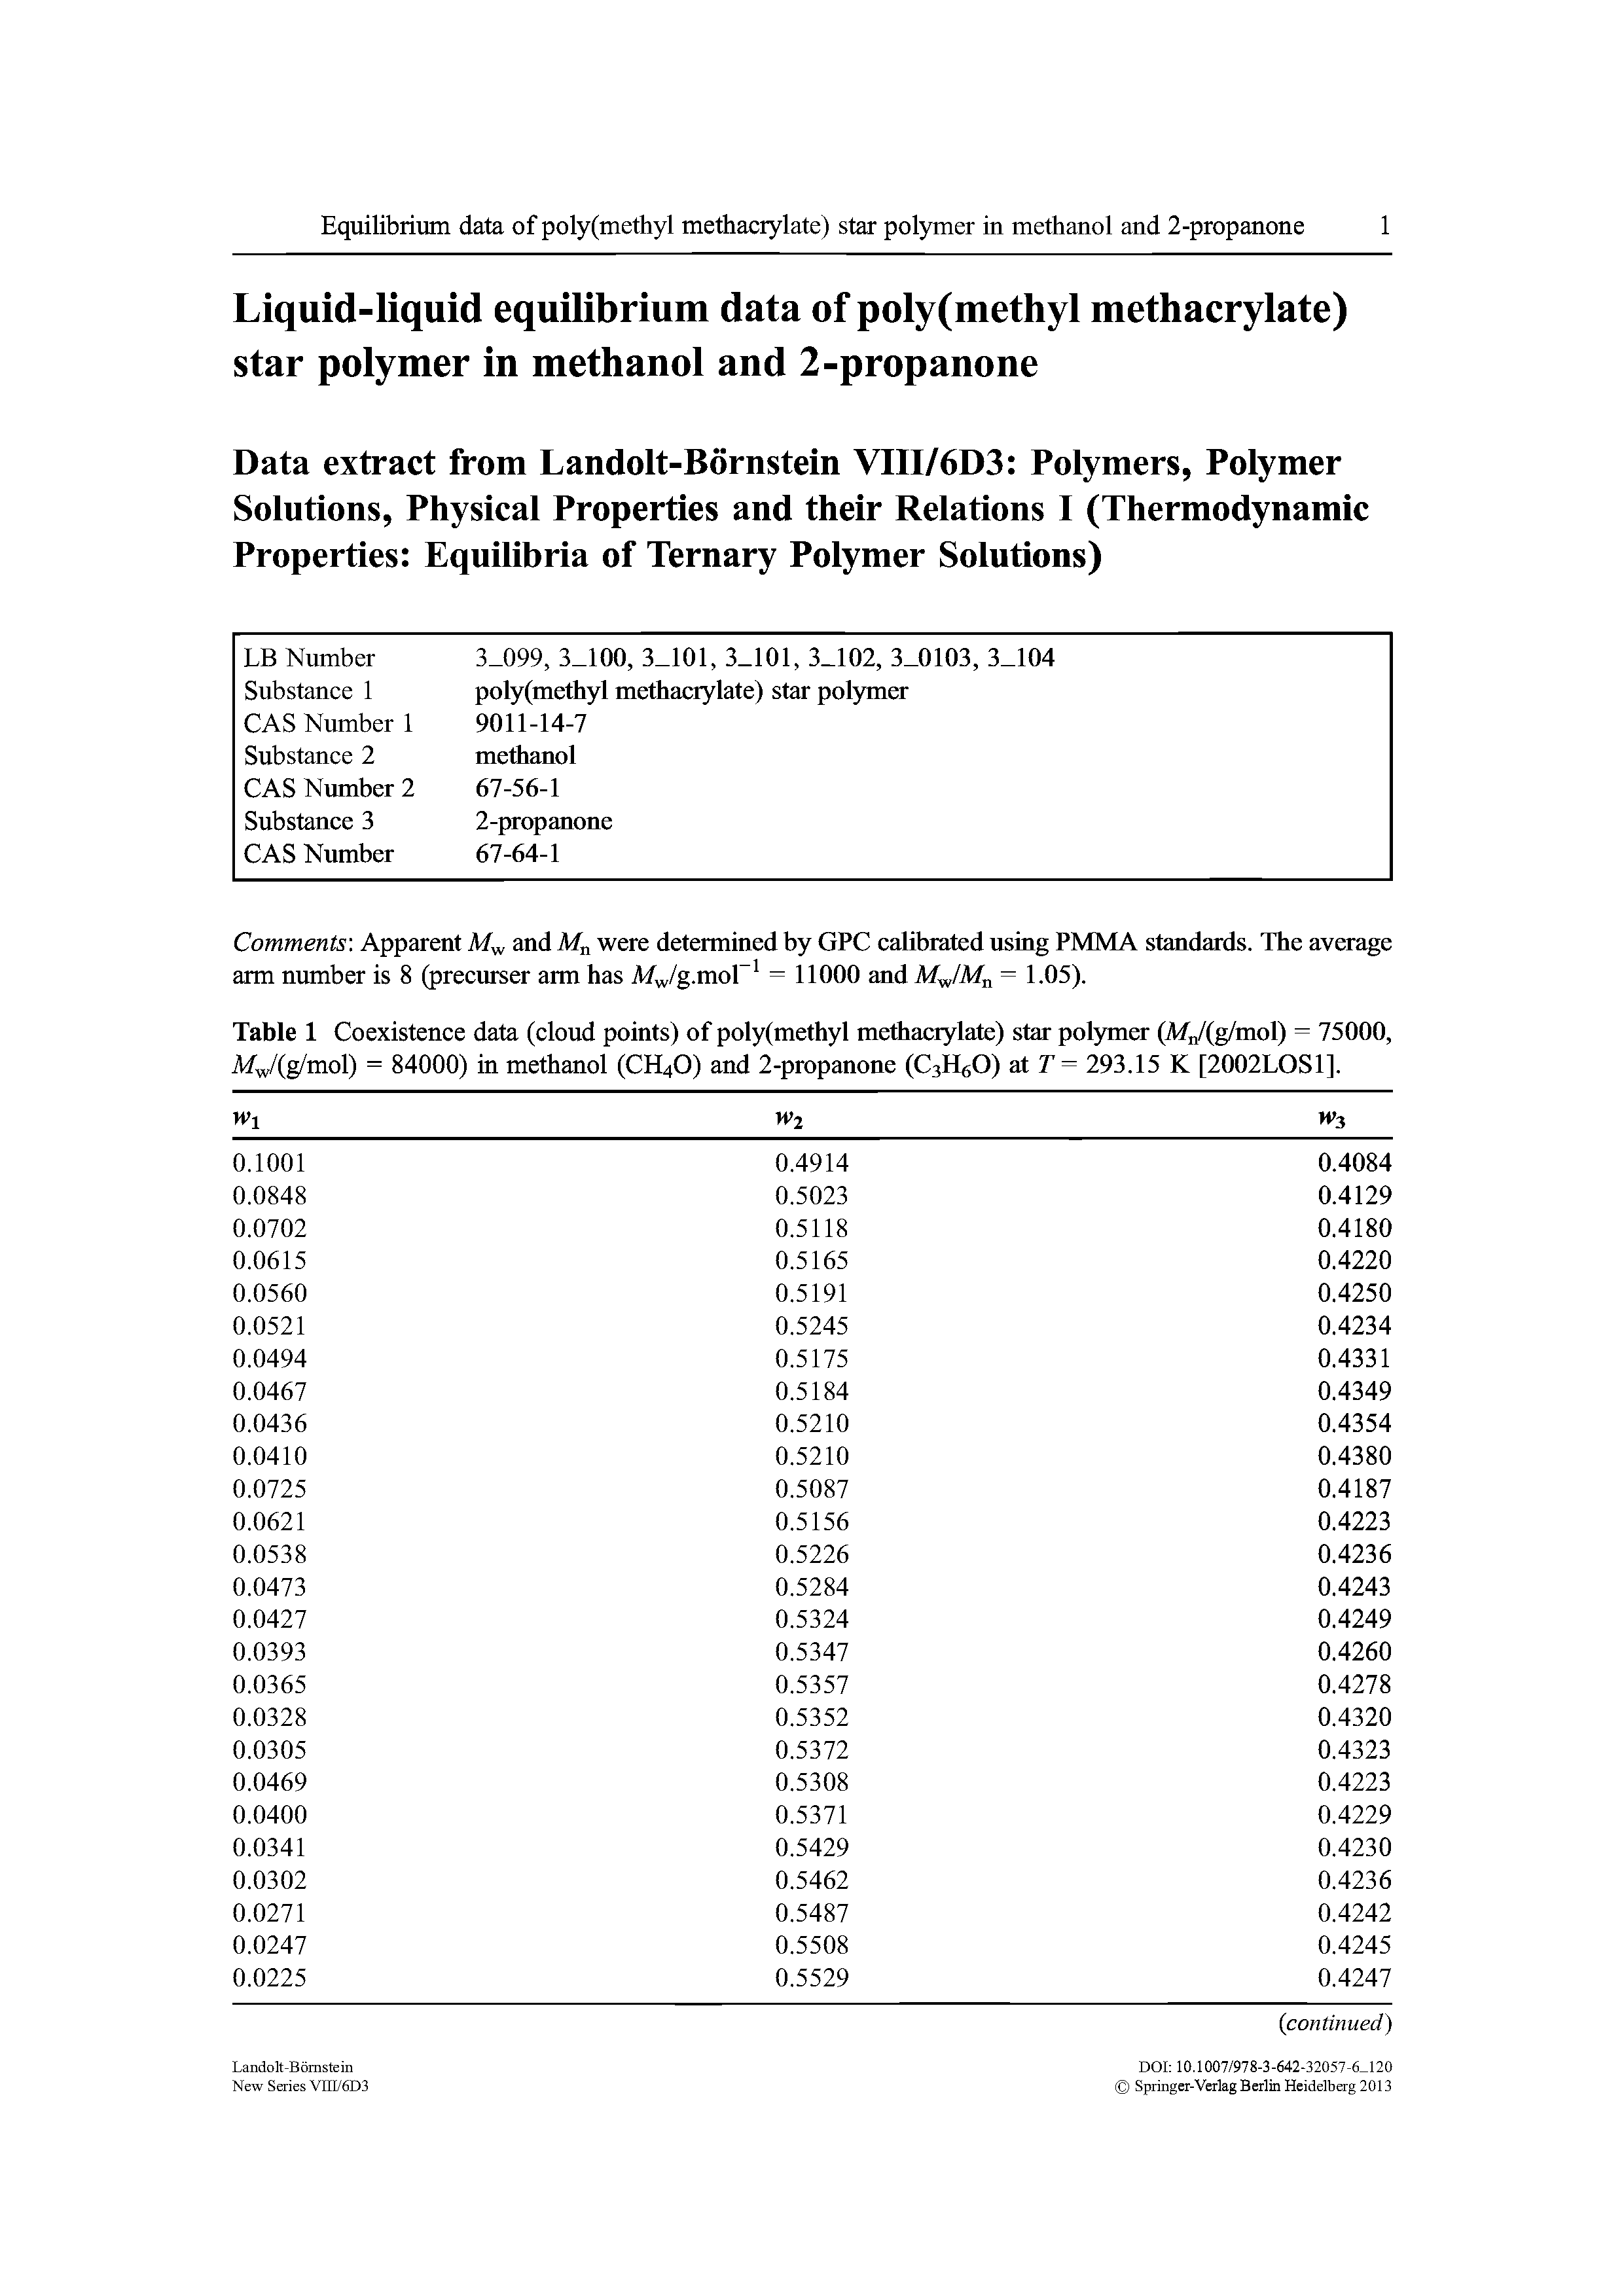 Table 1 Coexistence data (cloud points) of poly(methyl methacrylate) star polymer (M /(g/mol) = 75000, Mw/(g/mol) = 84000) in methanol (CH4O) and 2-propanone (CsHgO) at T= 293.15 K [2002LOS1].